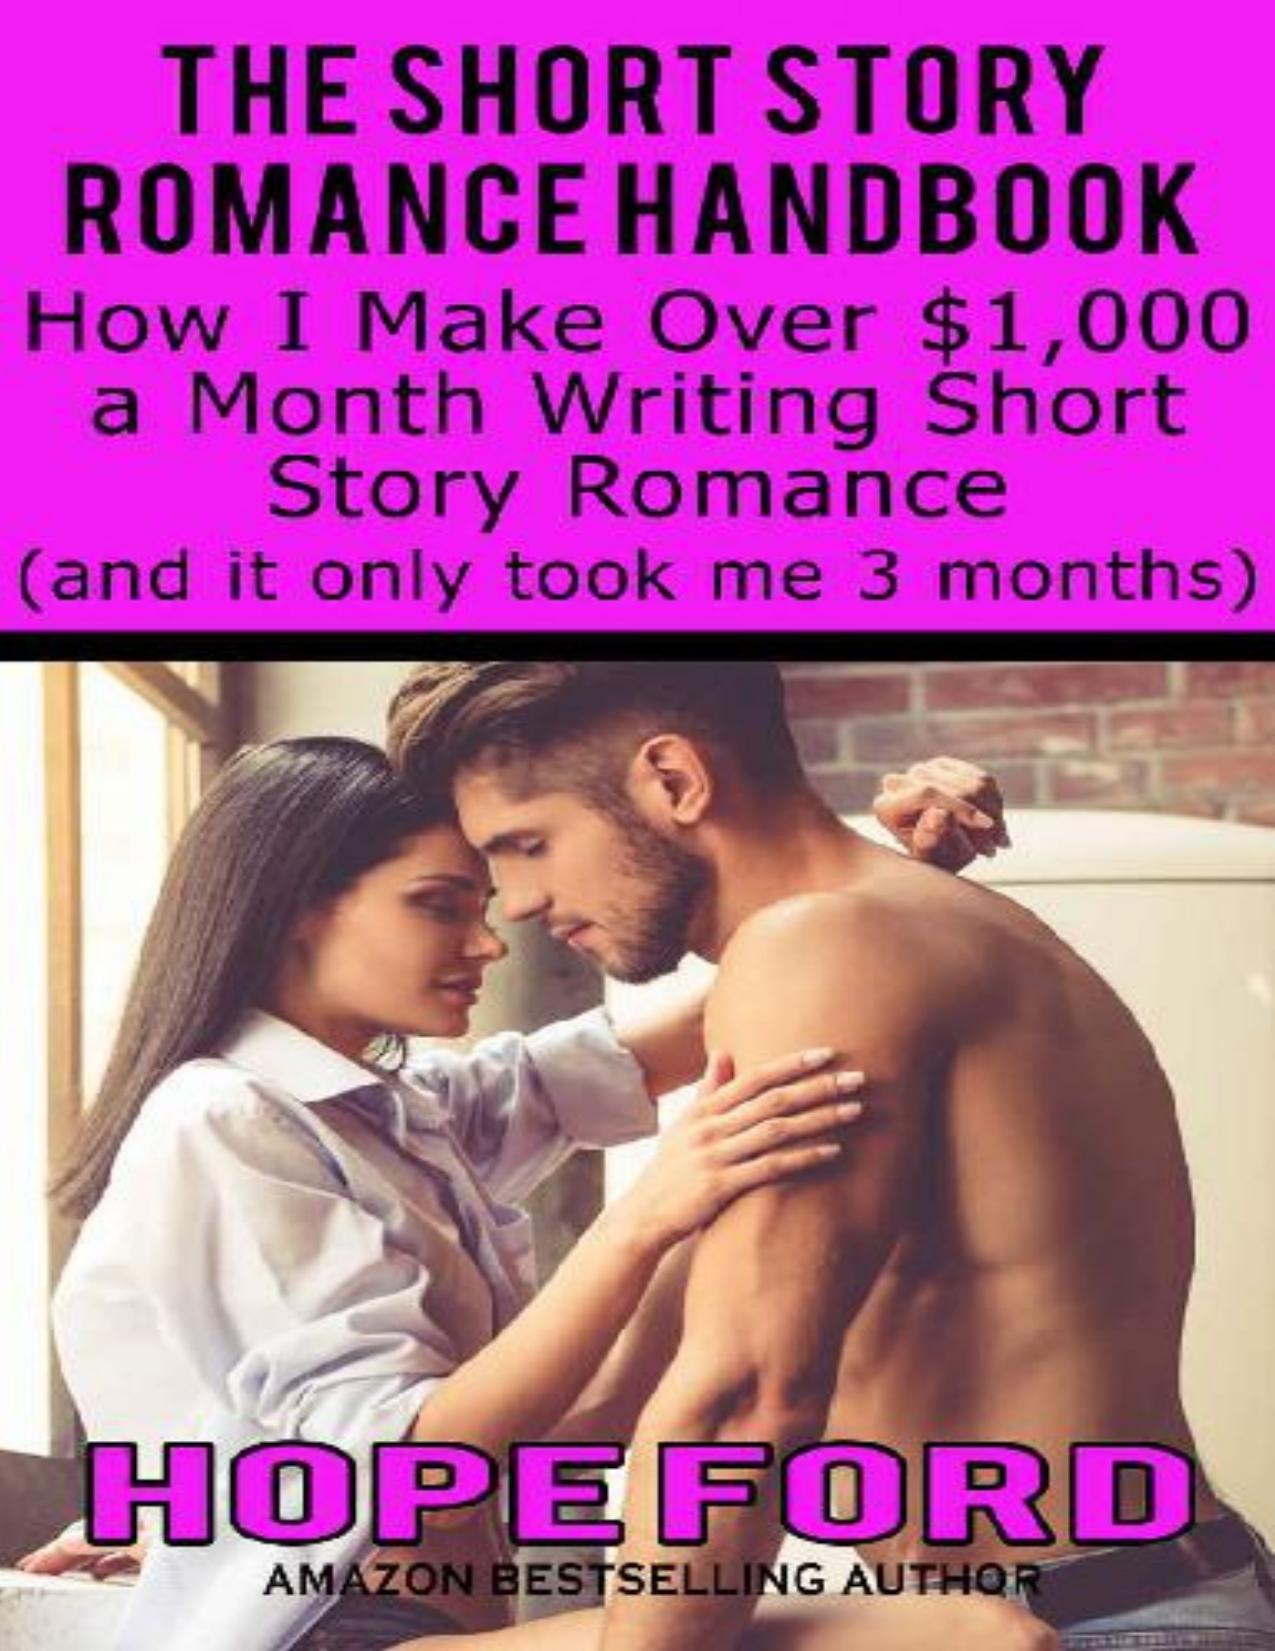 The Short Story Romance Handbook: How I Make Over $1,000 a Month Writing Short Story Romance (and it only took me 3 months)